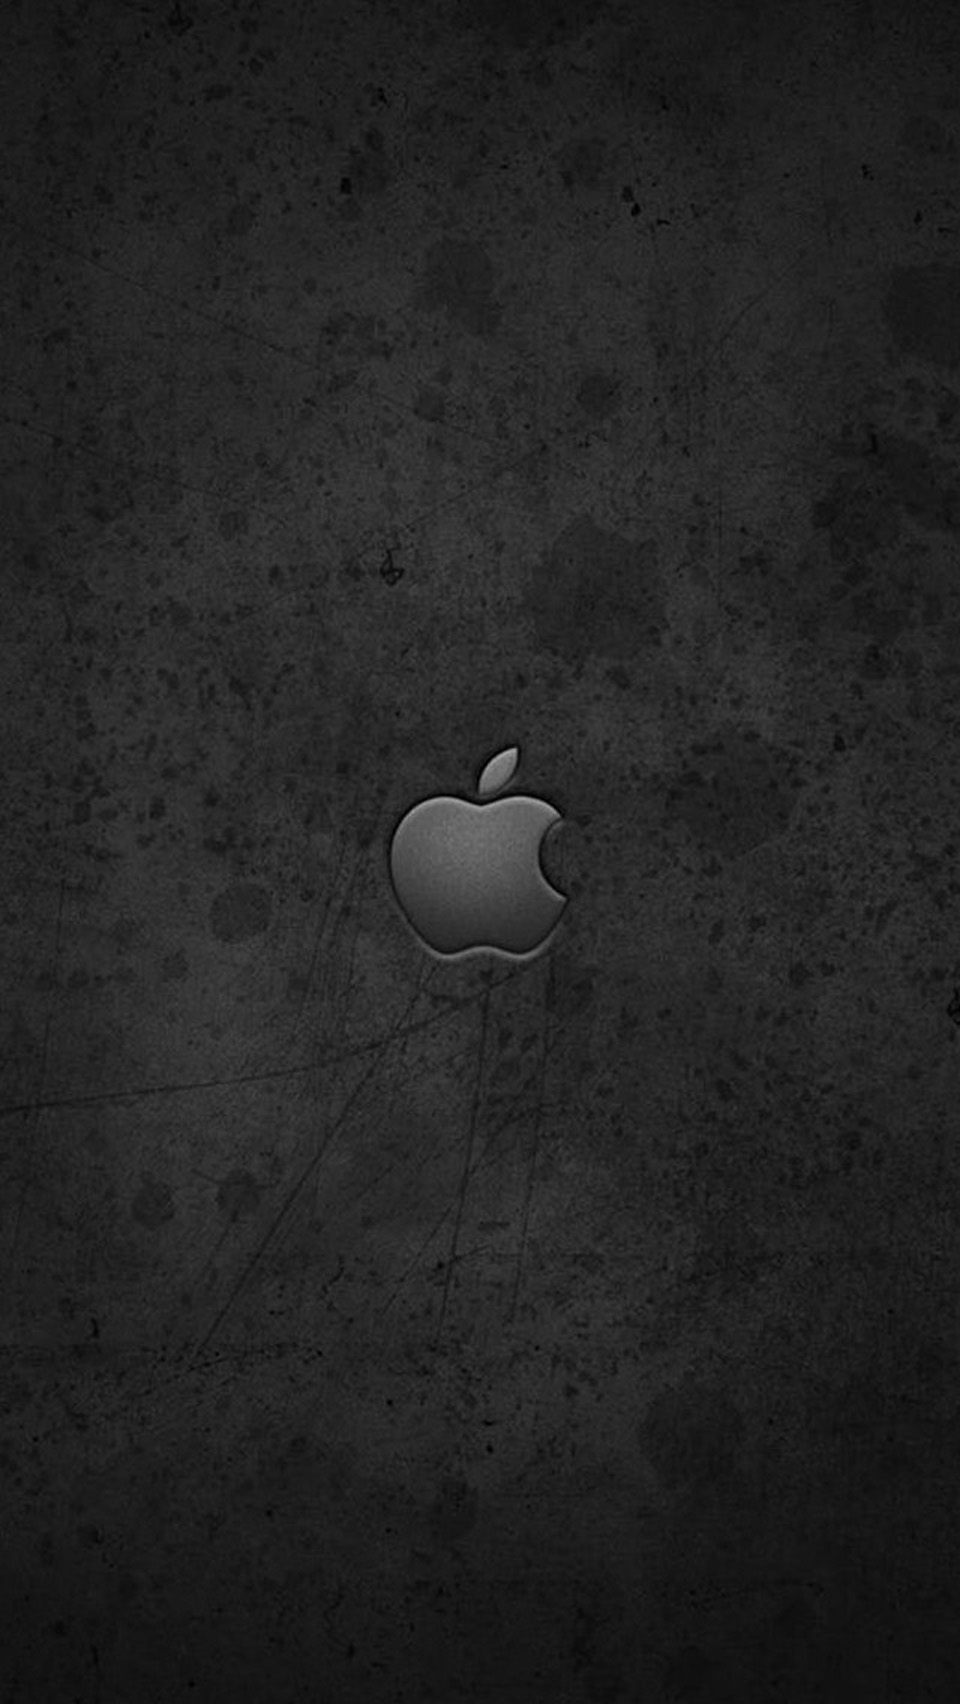 Apple Logo Wallpaper For Iphone 6 photos of Iphone Wallpaper Size 960x1704